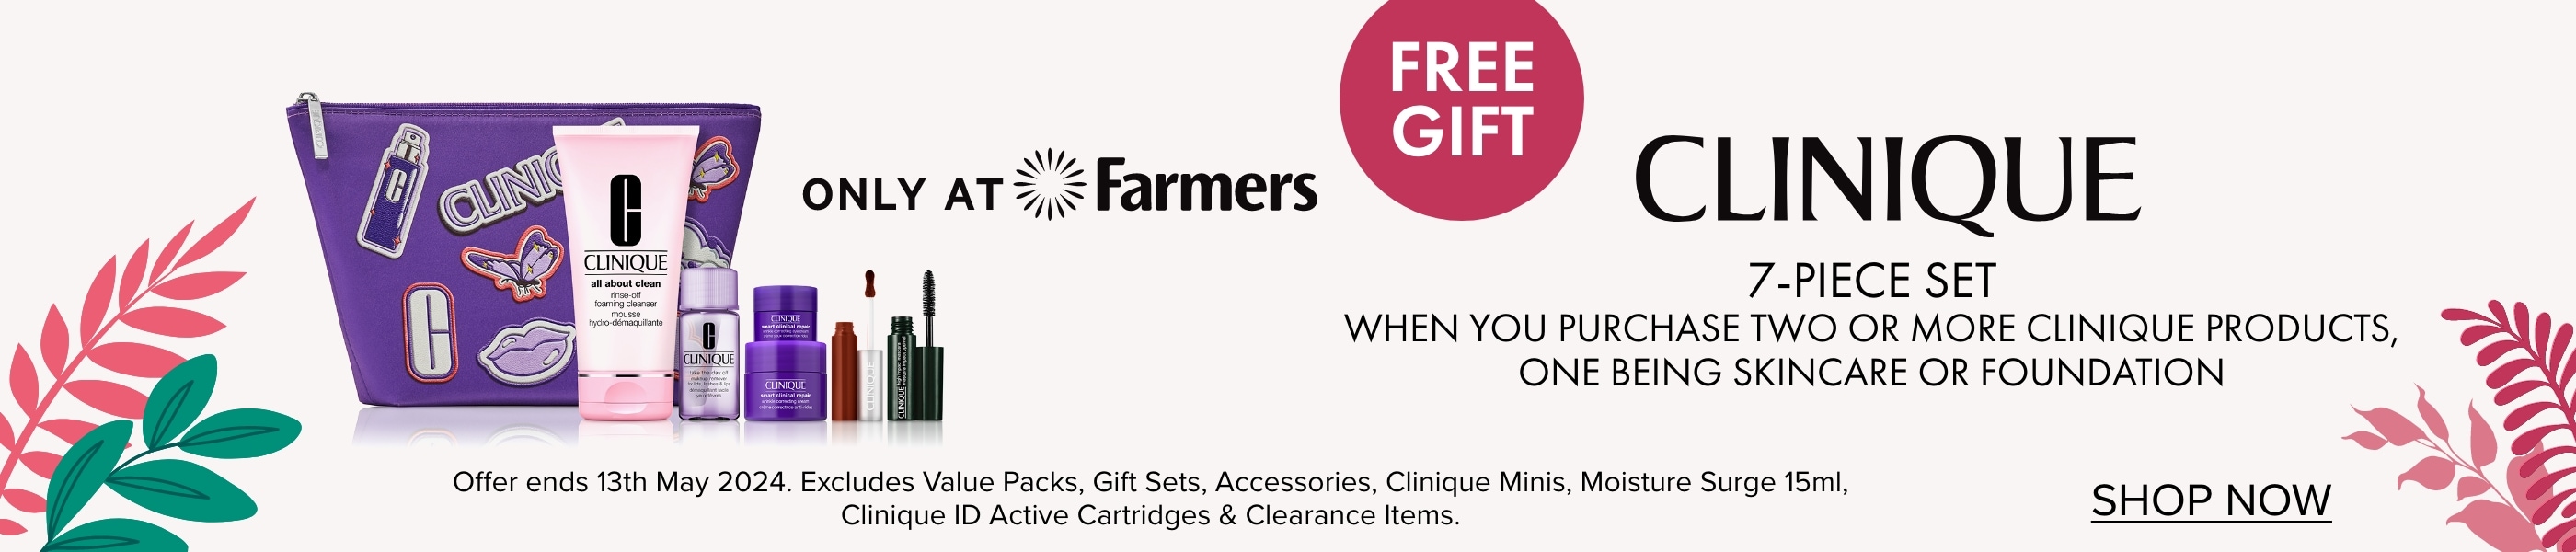 [Only at Farmers] FREE GIFT Clinique 7-Piece Set when you purchase two or more Clinique products, one being skincare or foundation